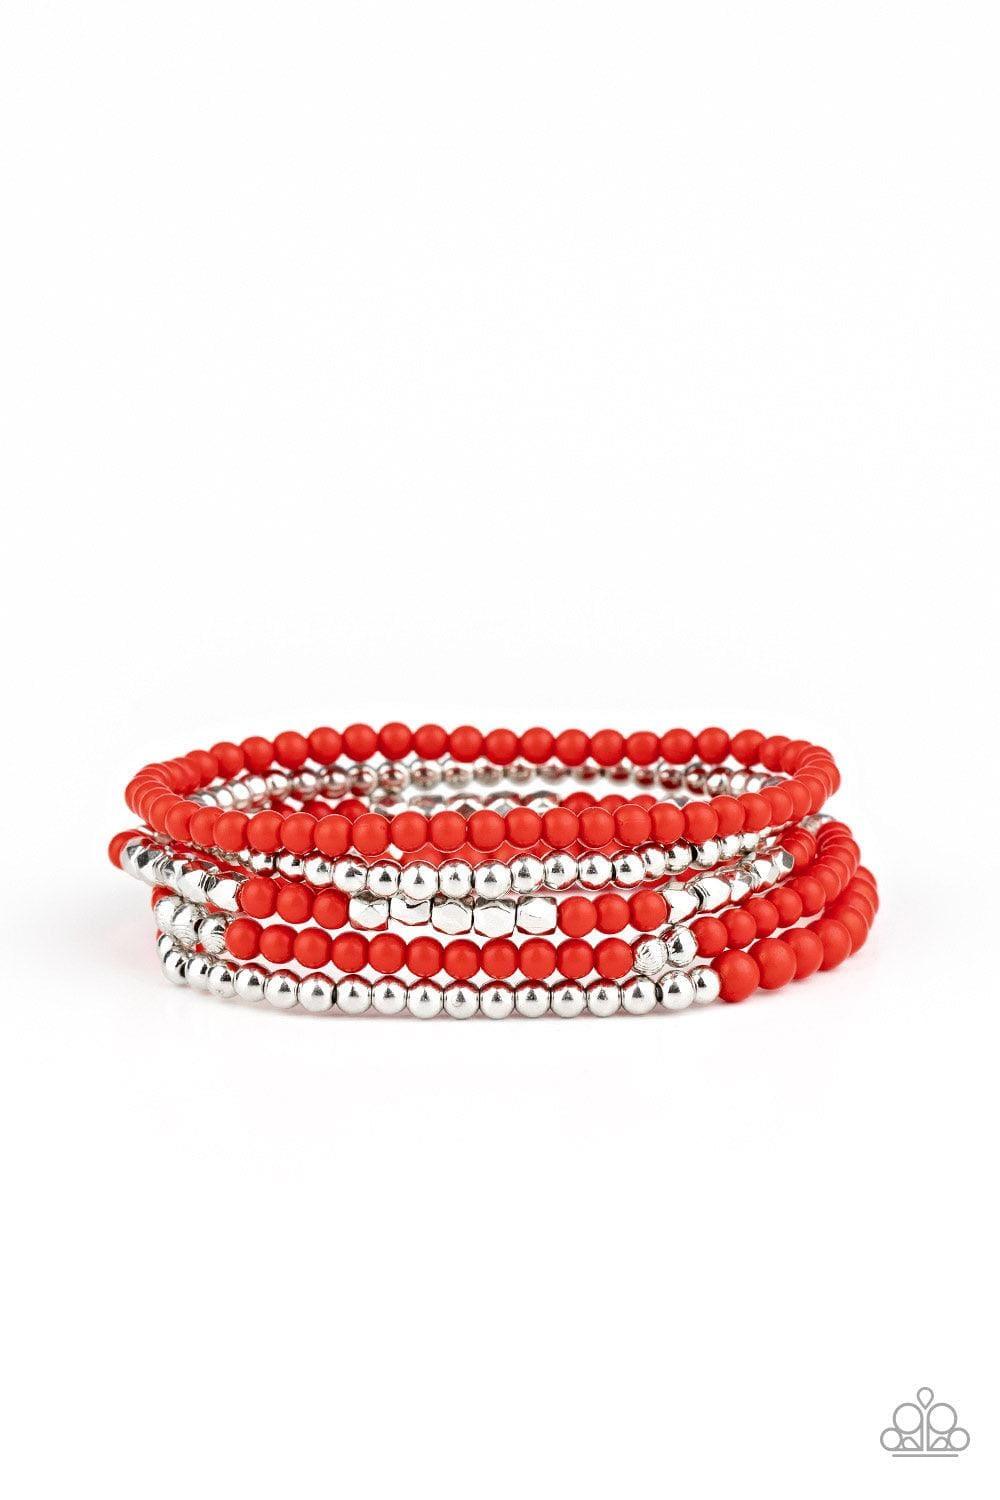 Paparazzi Accessories - Stacked Showcase - Red Bracelet - Bling by JessieK